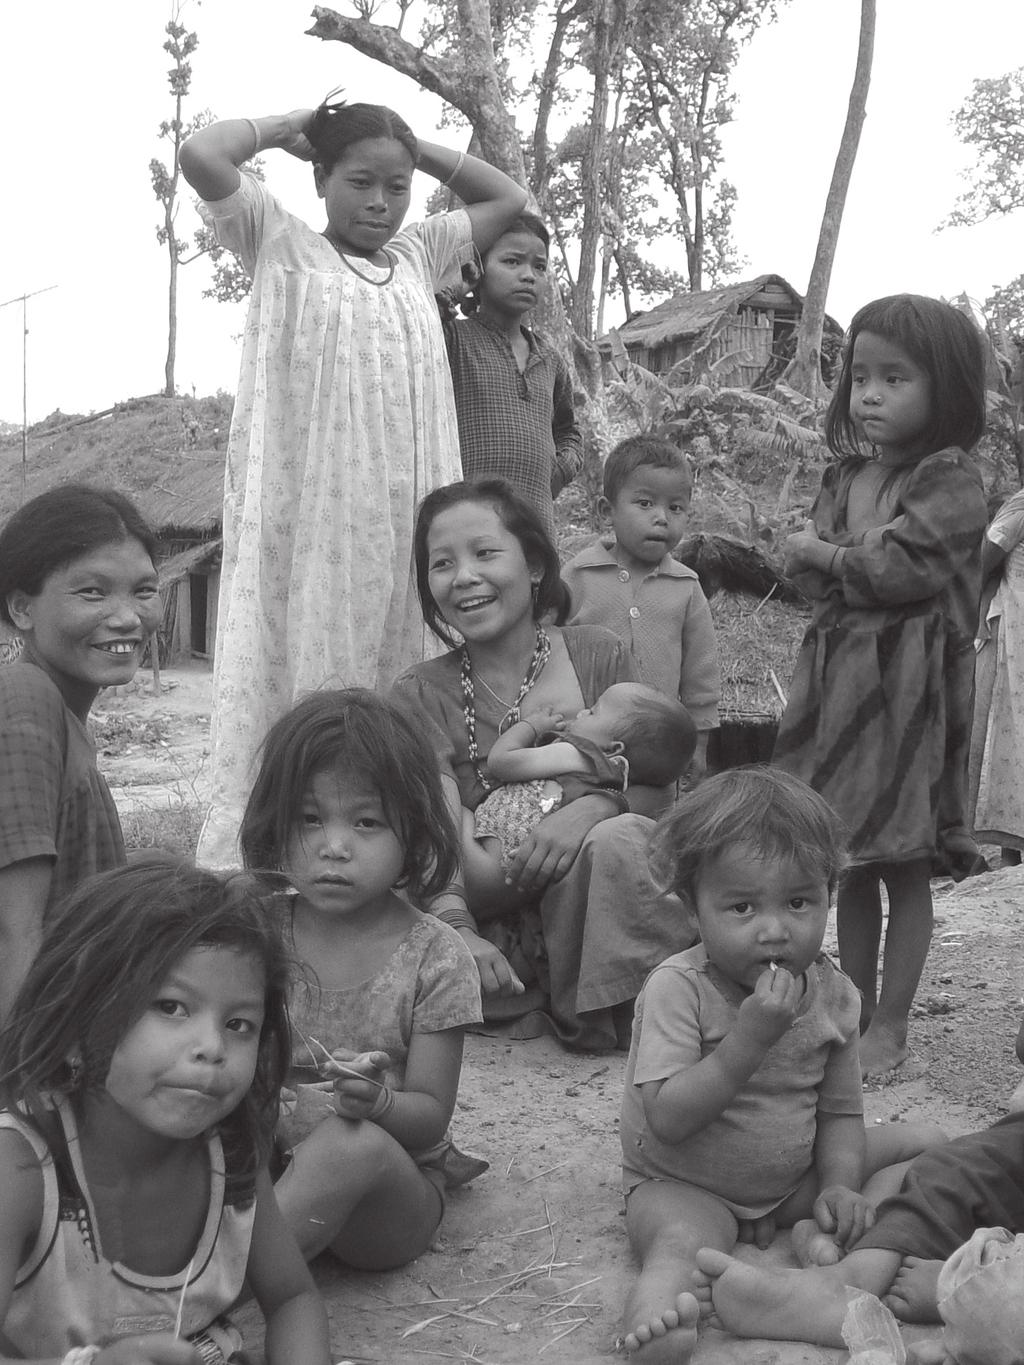 38 The Human Right to Food in Nepal Discriminatory practices limit the access of indigenous